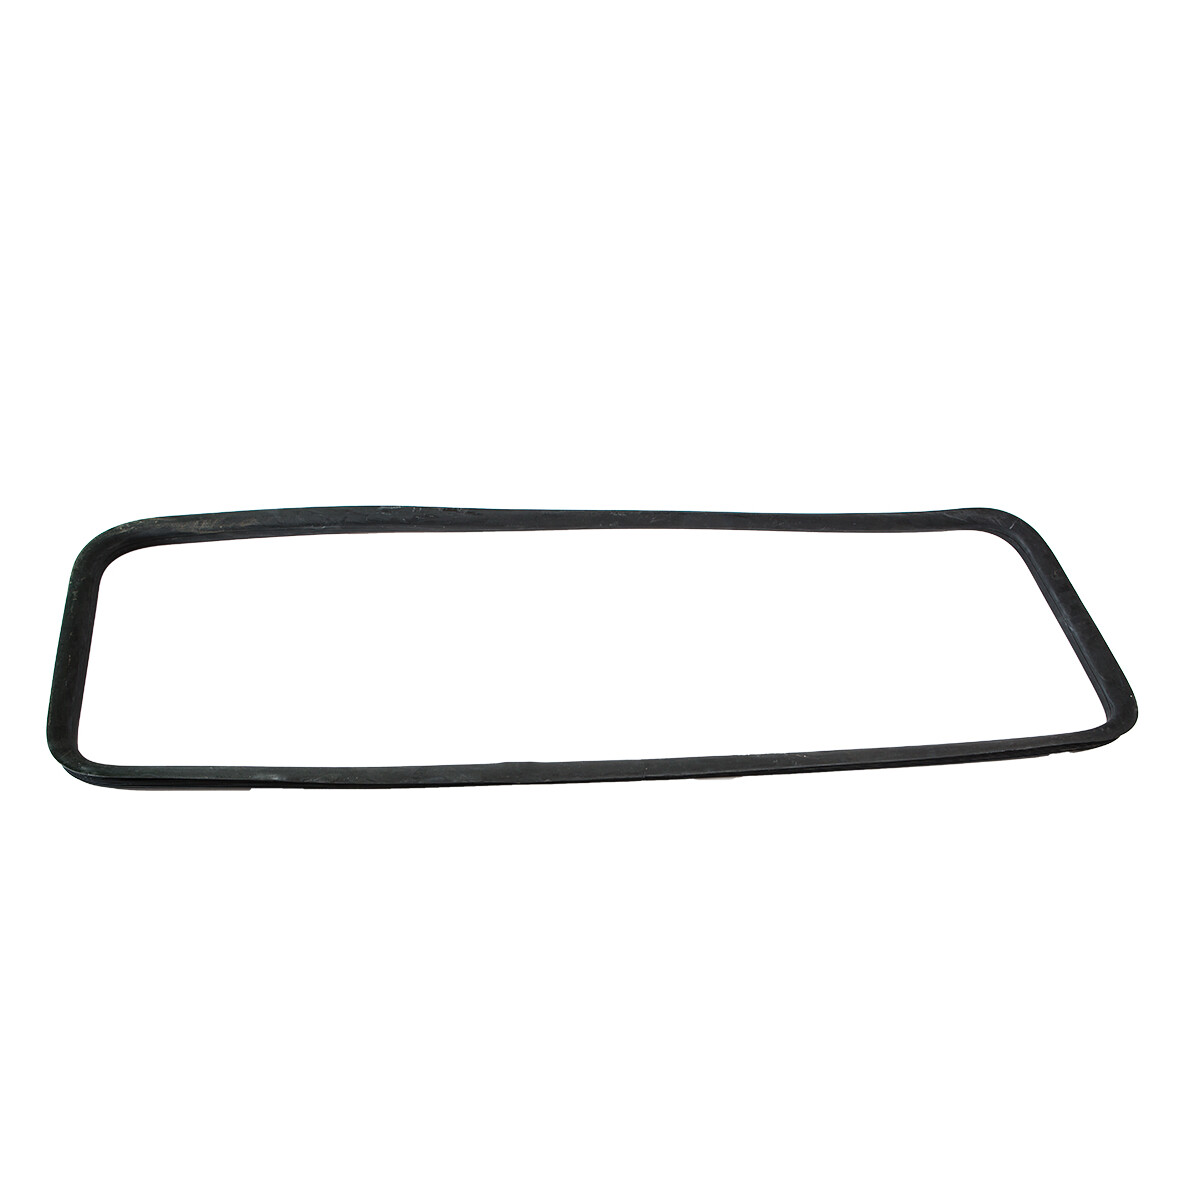 TYPE 2 BAY Front Screen Seal For Plastic Trim T2 68-79 241845121DT 